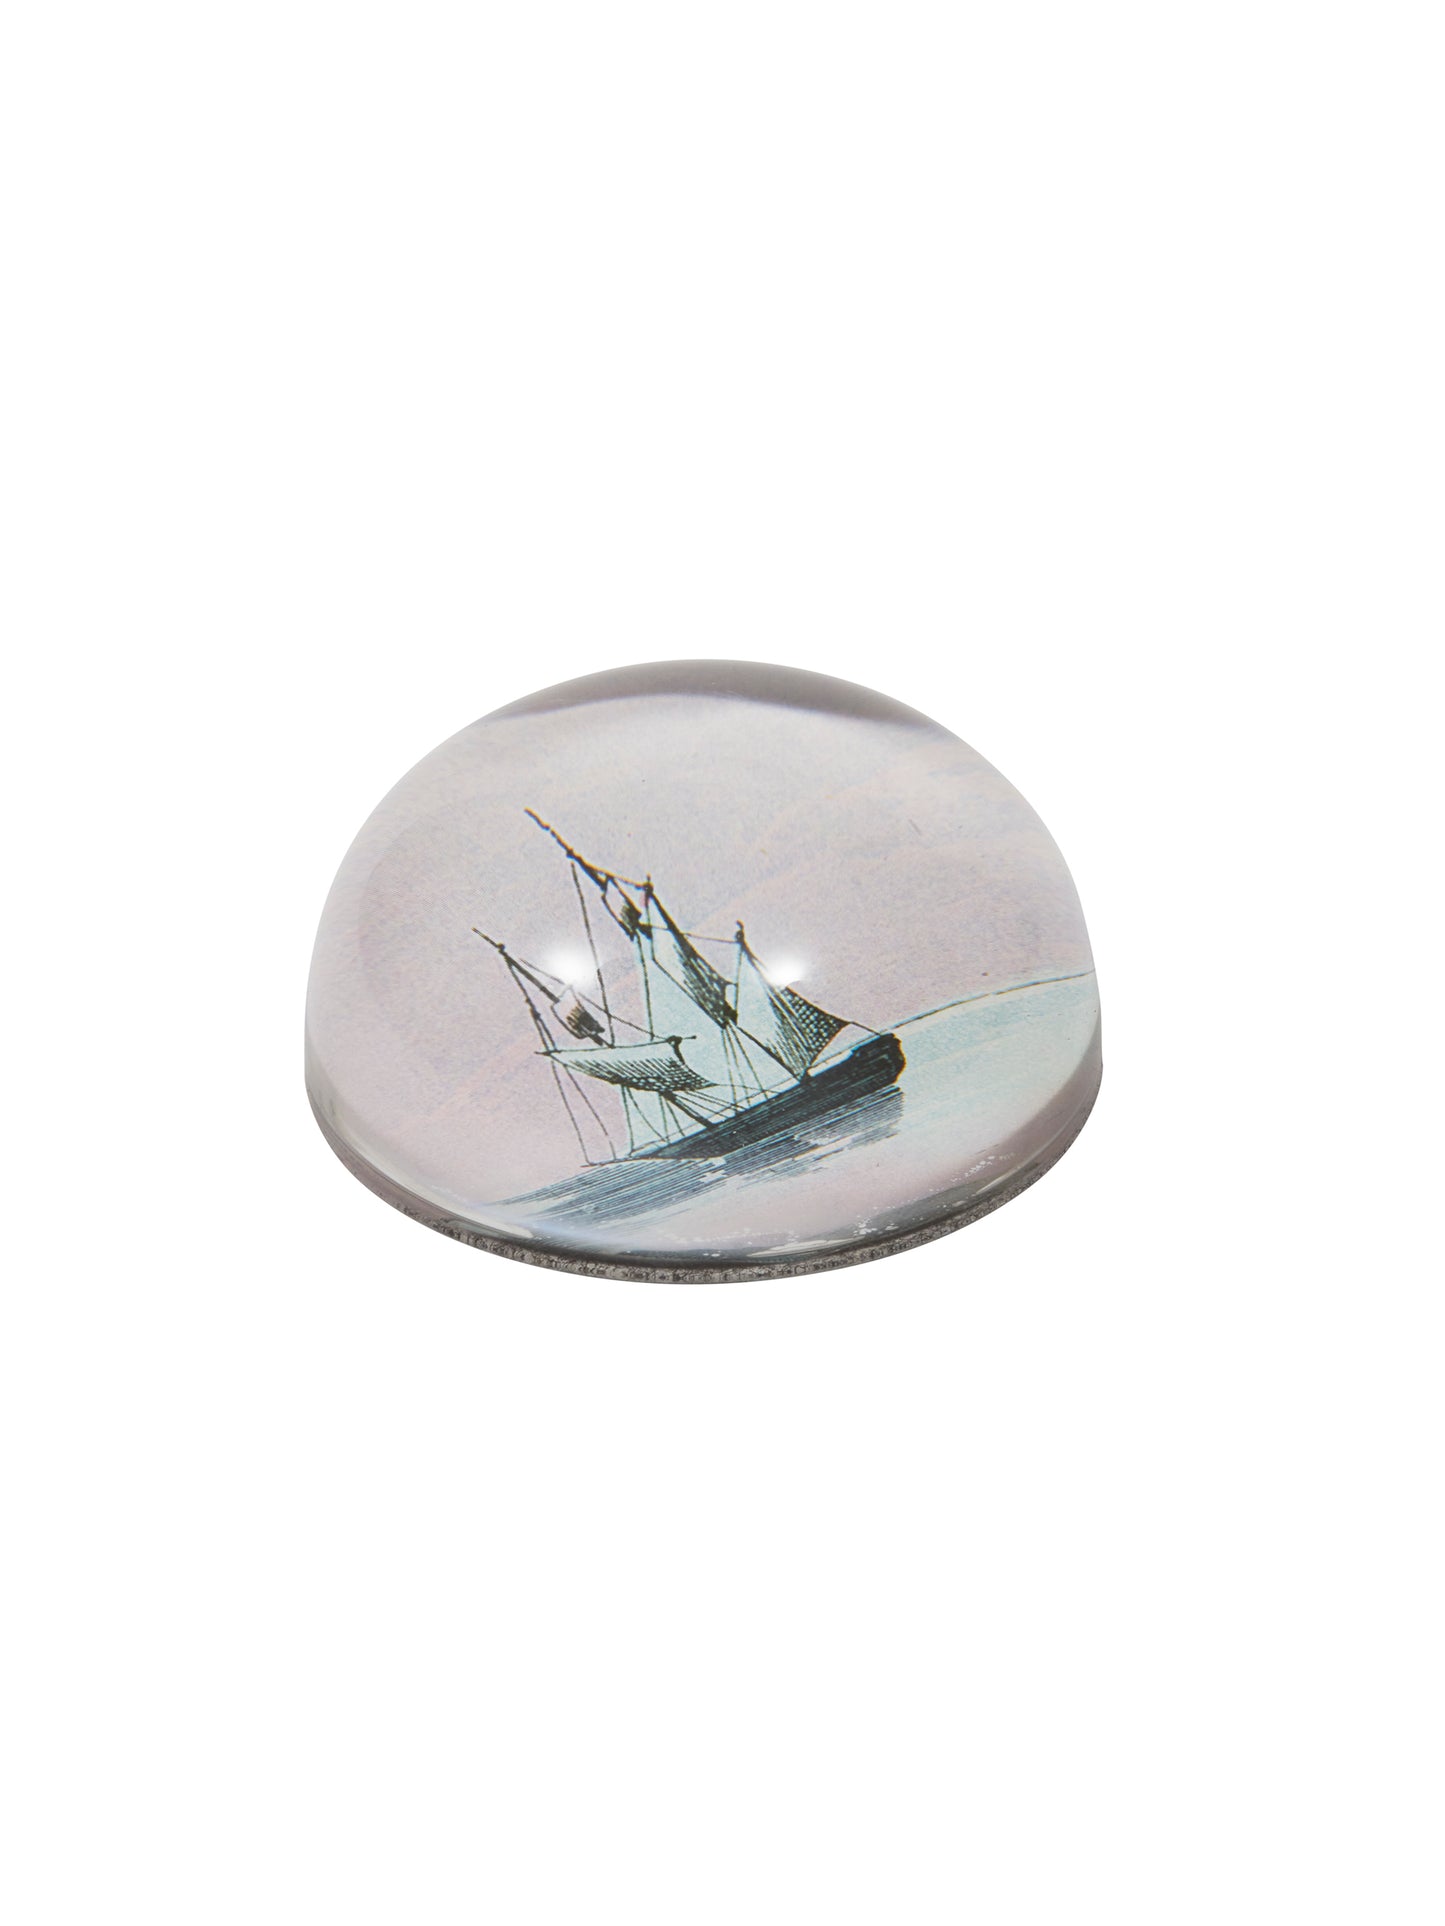 Vintage Ship Dome Paperweight Weston Table